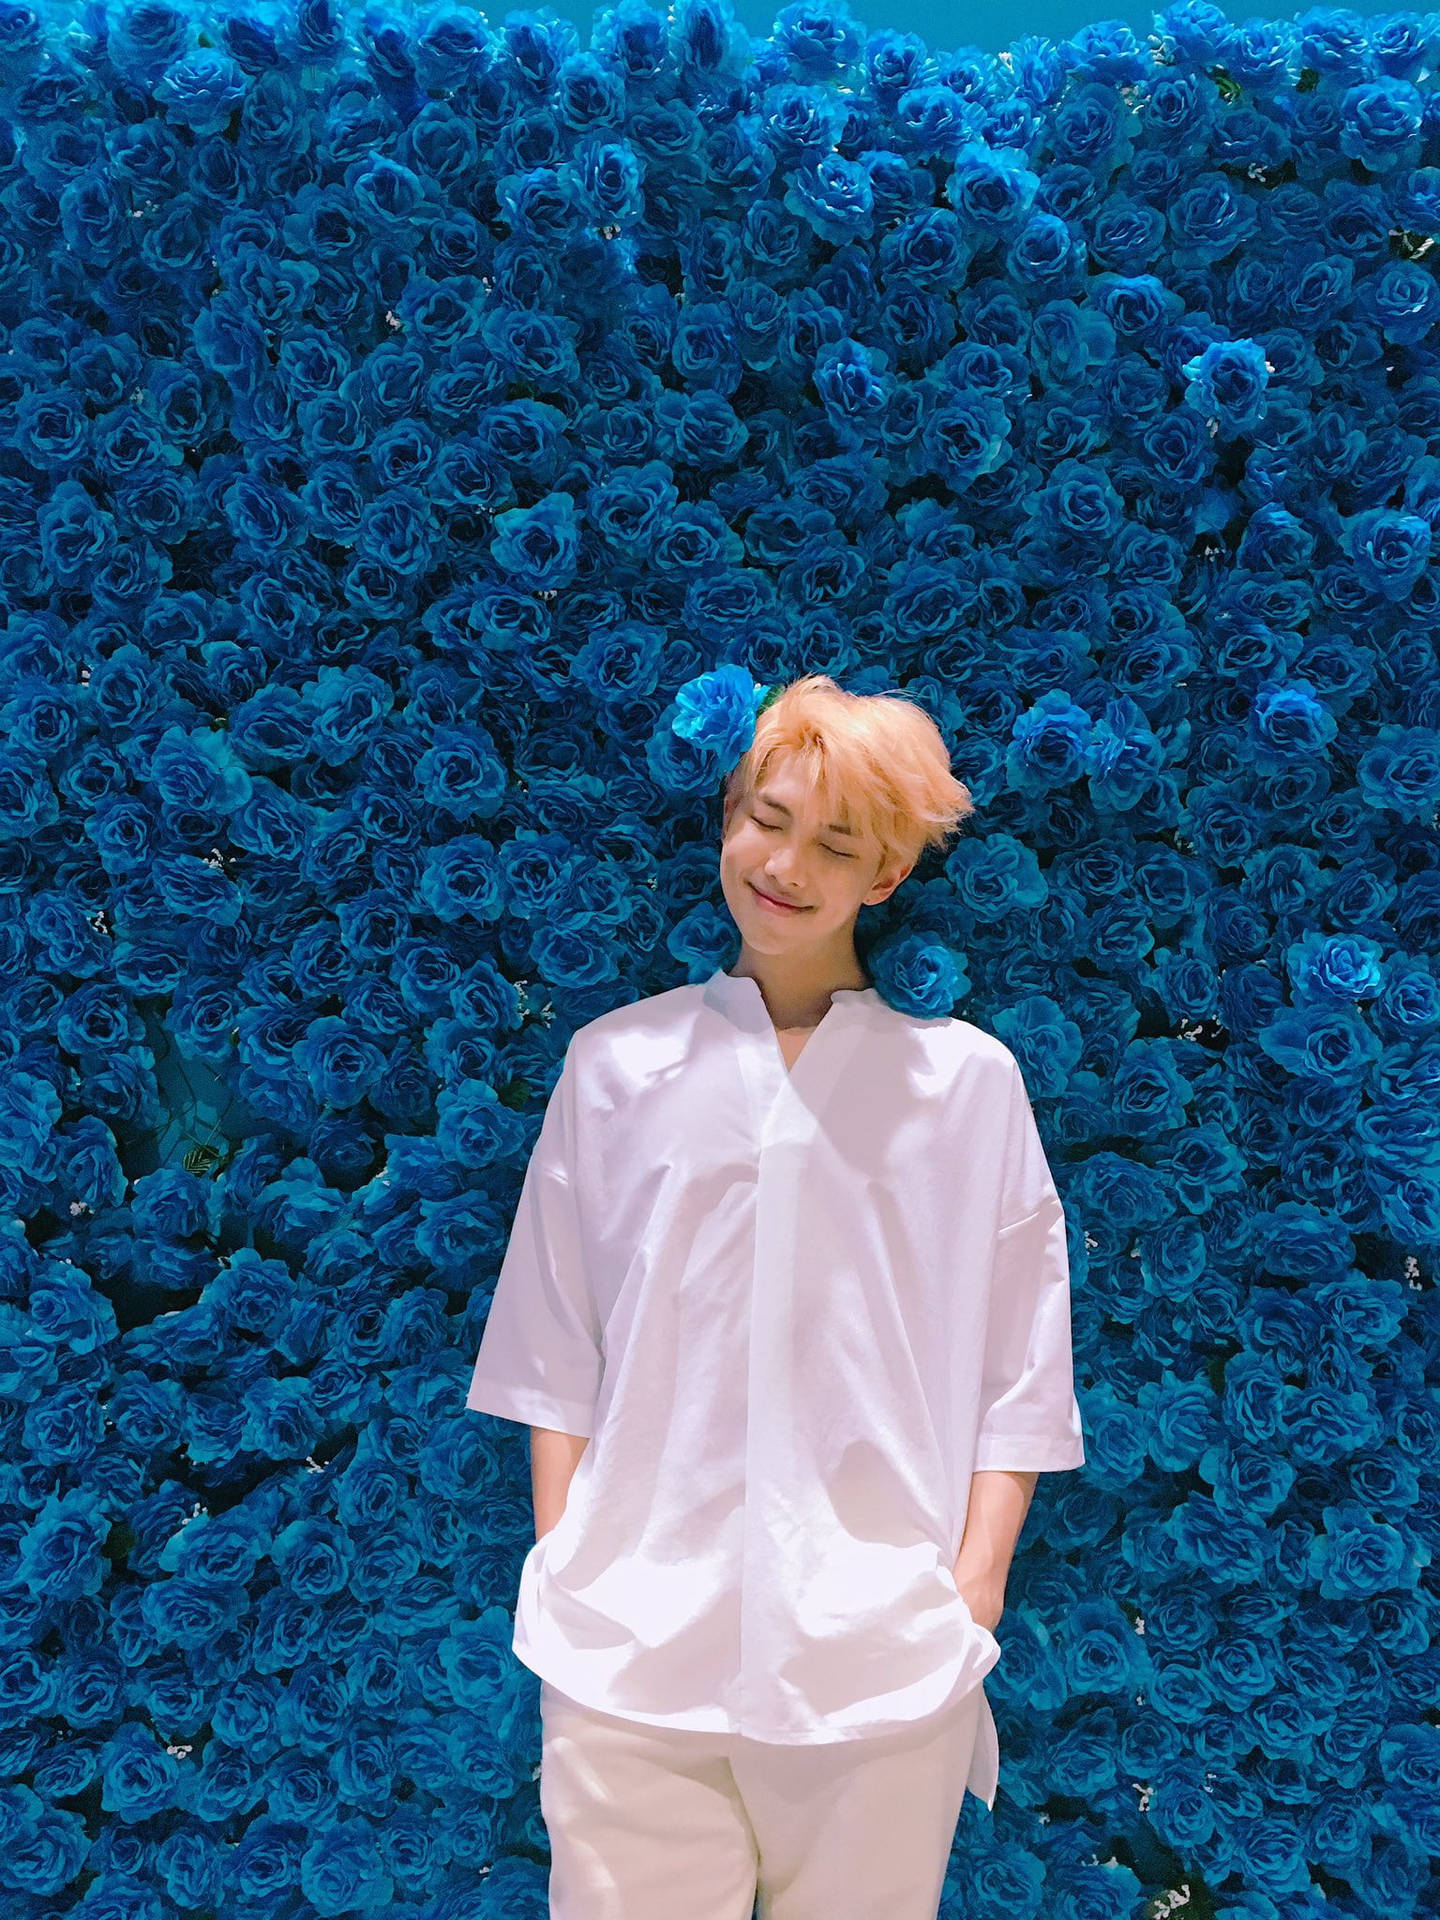 Bts Rm Cute Blue Roses Background